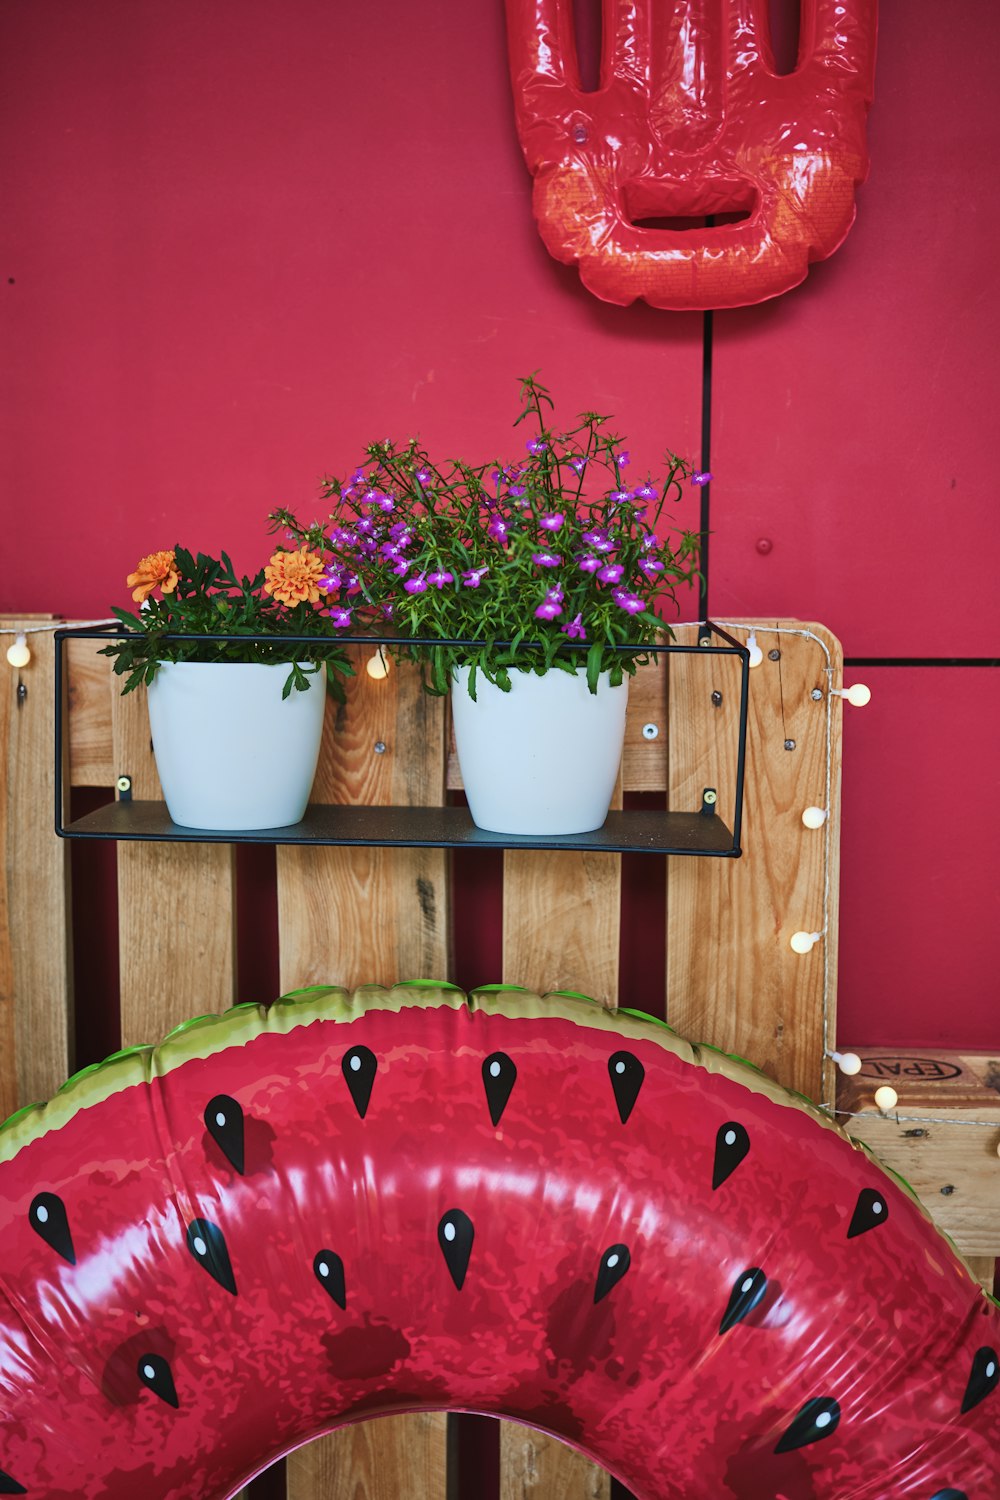 a planter filled with flowers sitting on top of a wooden shelf